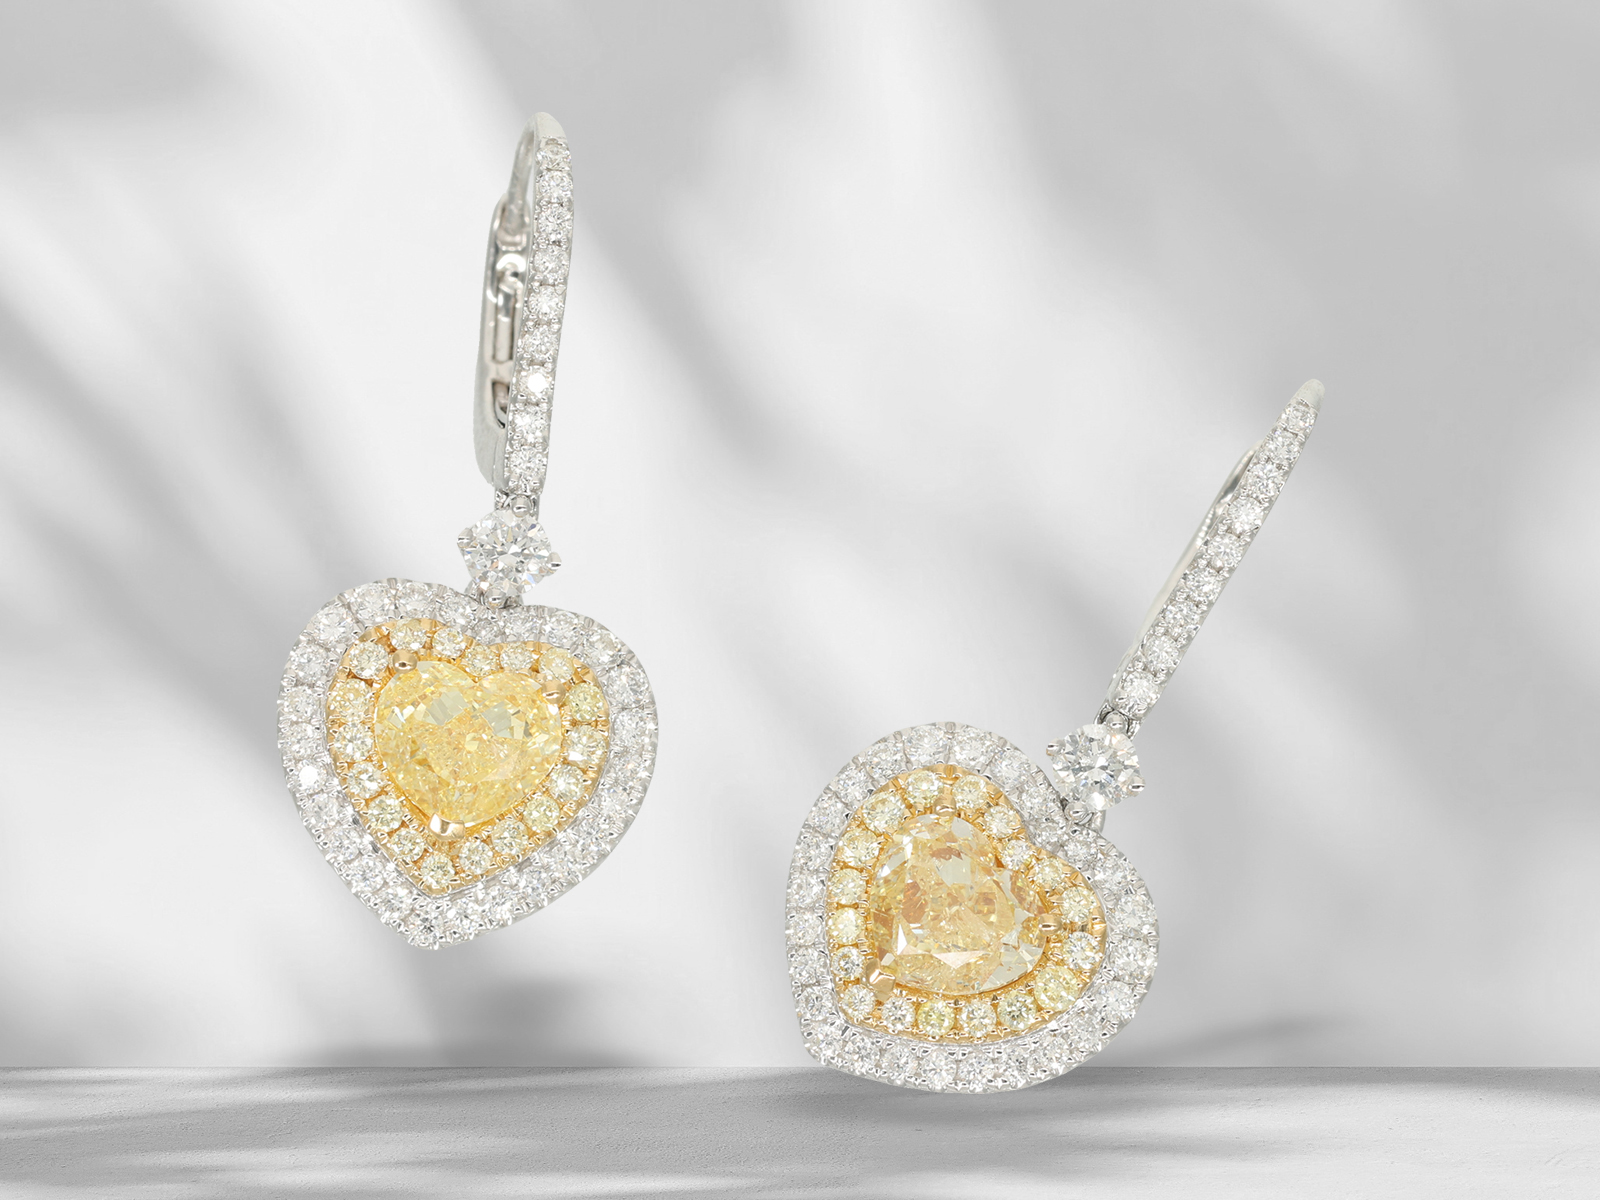 Earrings: High quality earrings set with brilliant-cut diamonds, 2 x 1ct fancy light yellow - Image 6 of 8